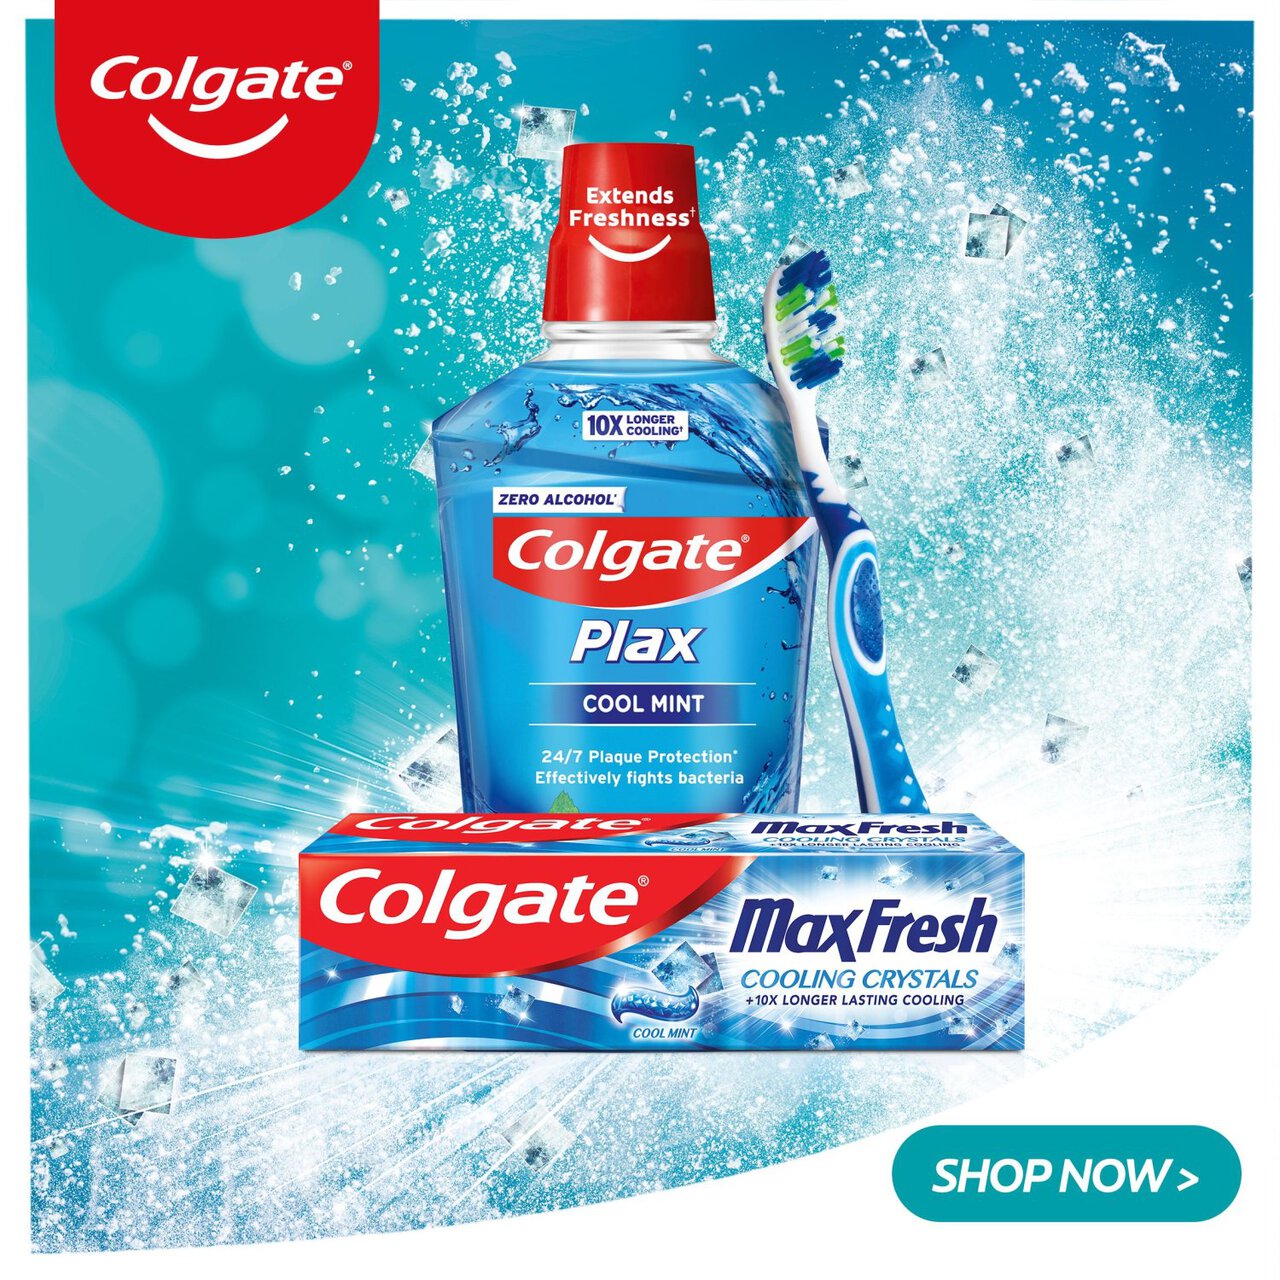 Colgate Max Fresh Cooling Crystals 75ml